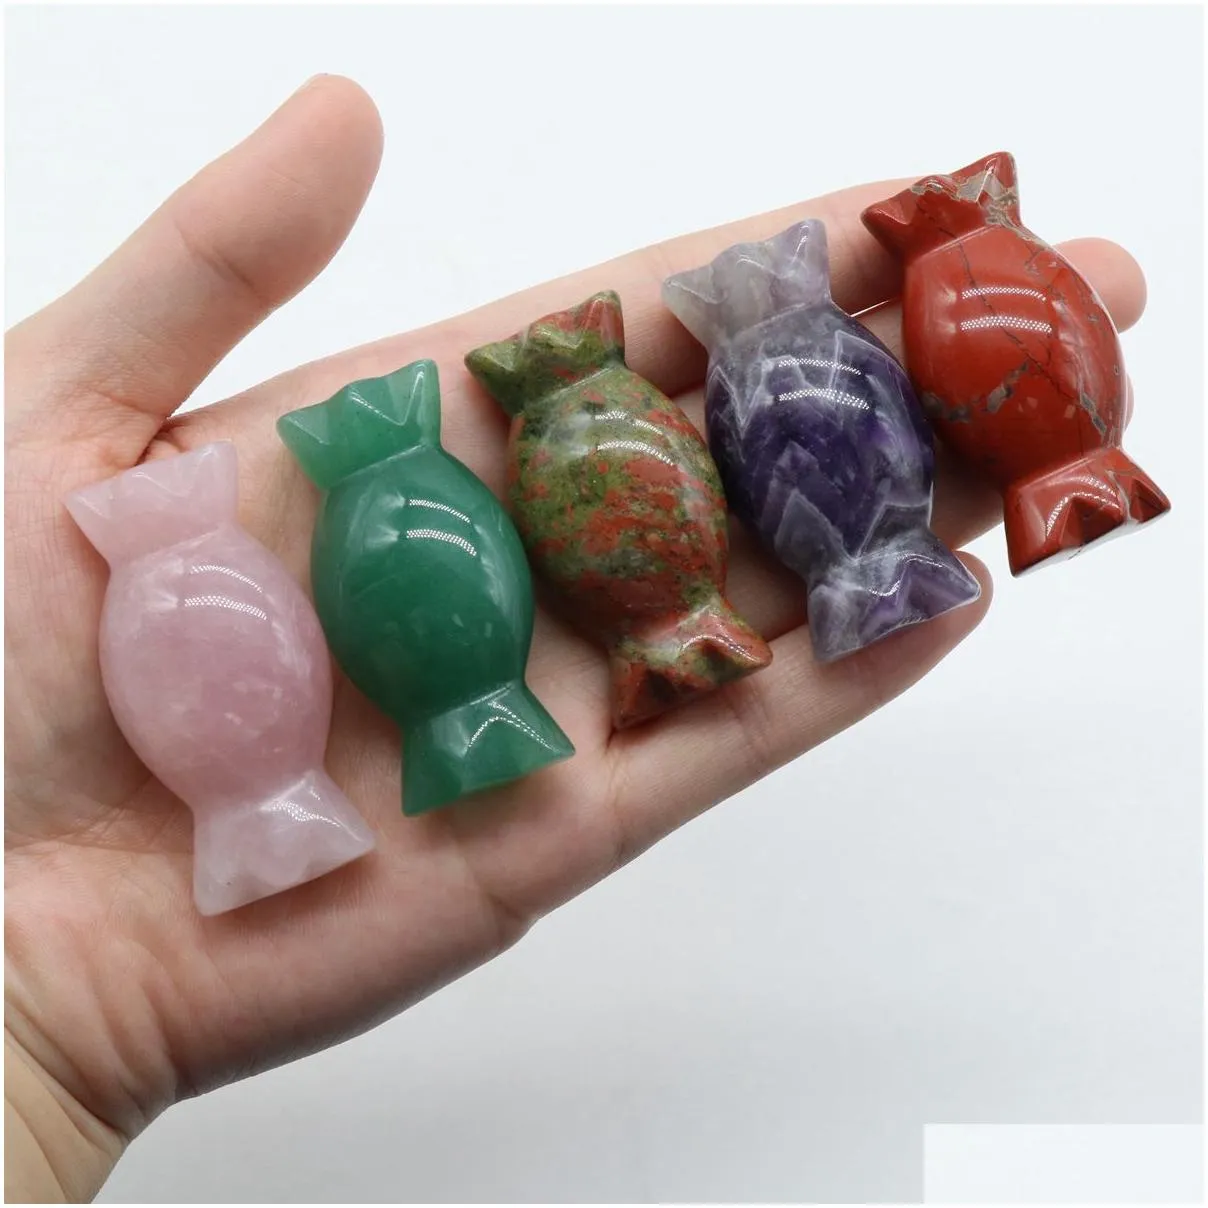 Natural Crystal Stone Carving Festival Candy Gift Gemstone Agate Ornaments Folk Arts Healing Energy For Decorate